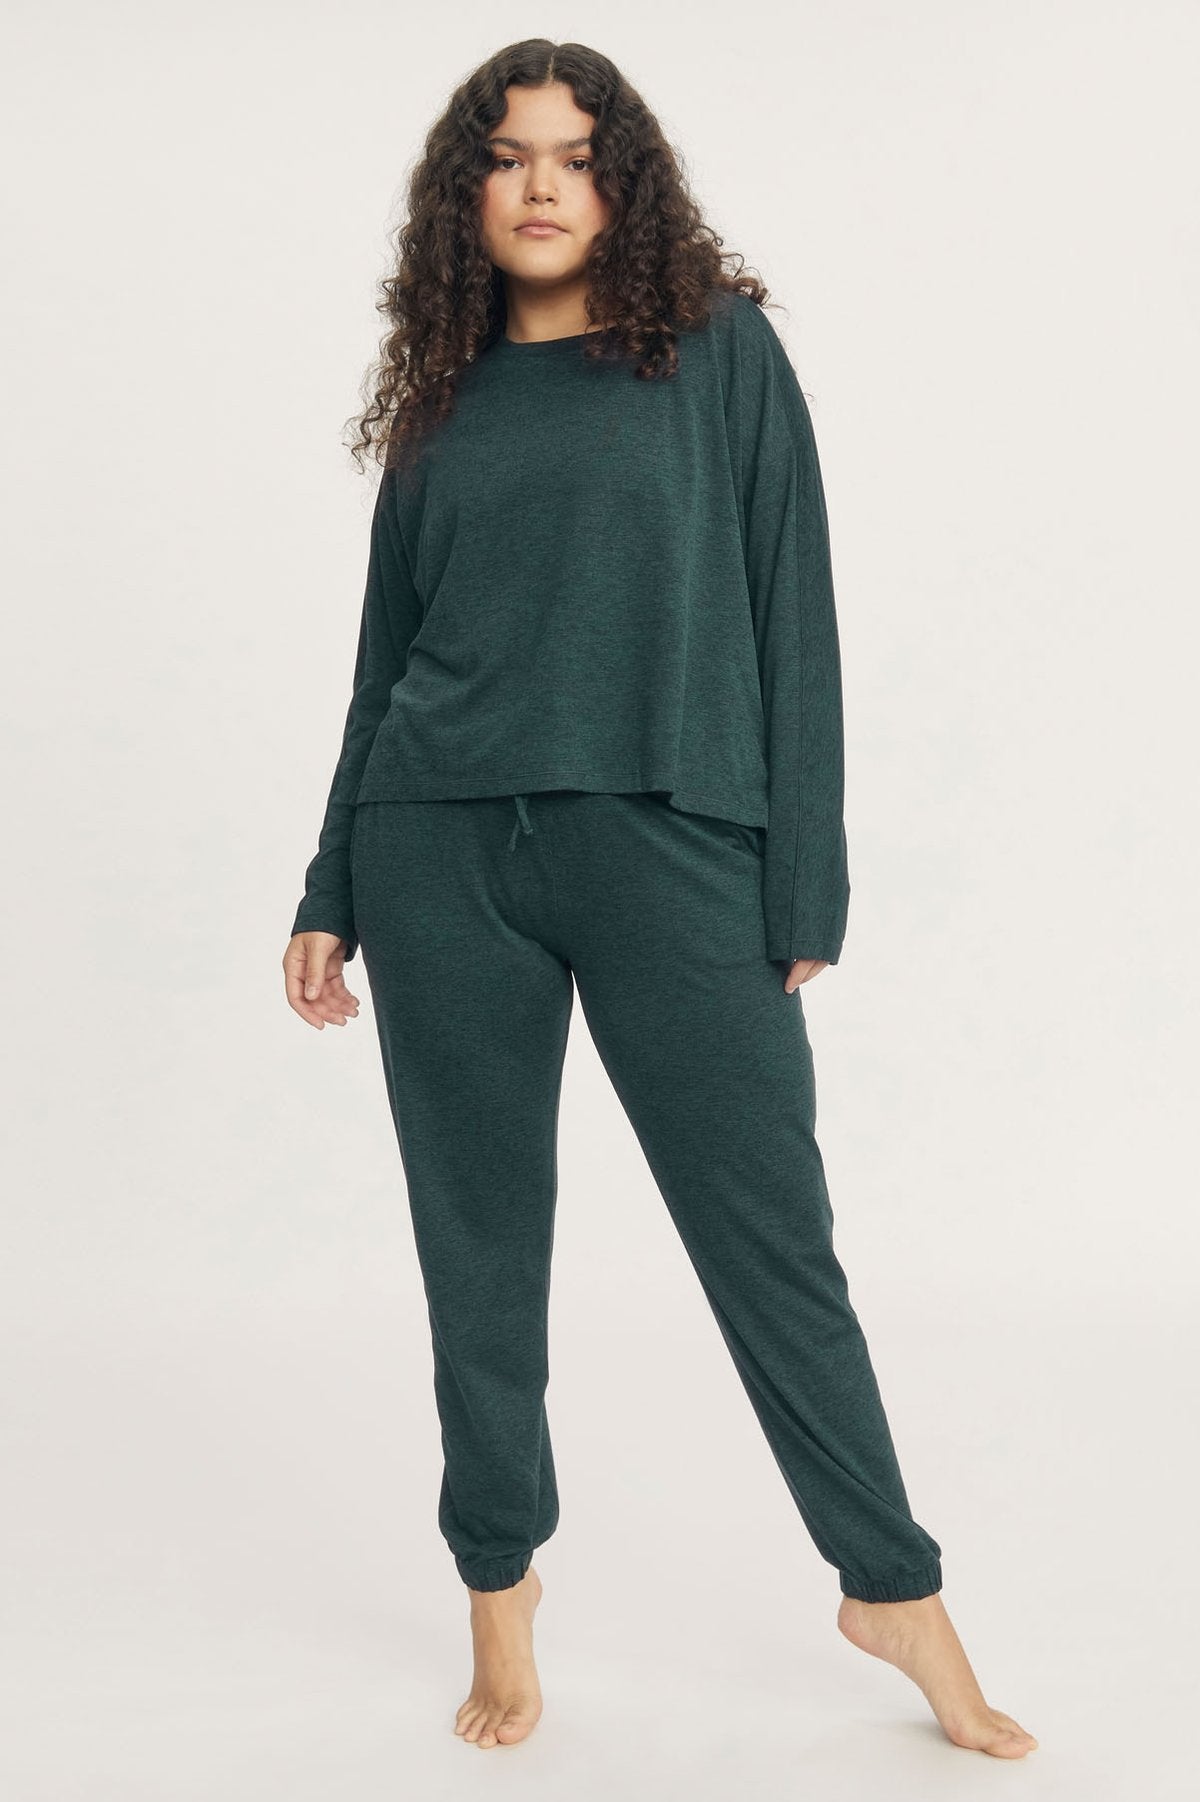 Brand Launched Loungewear